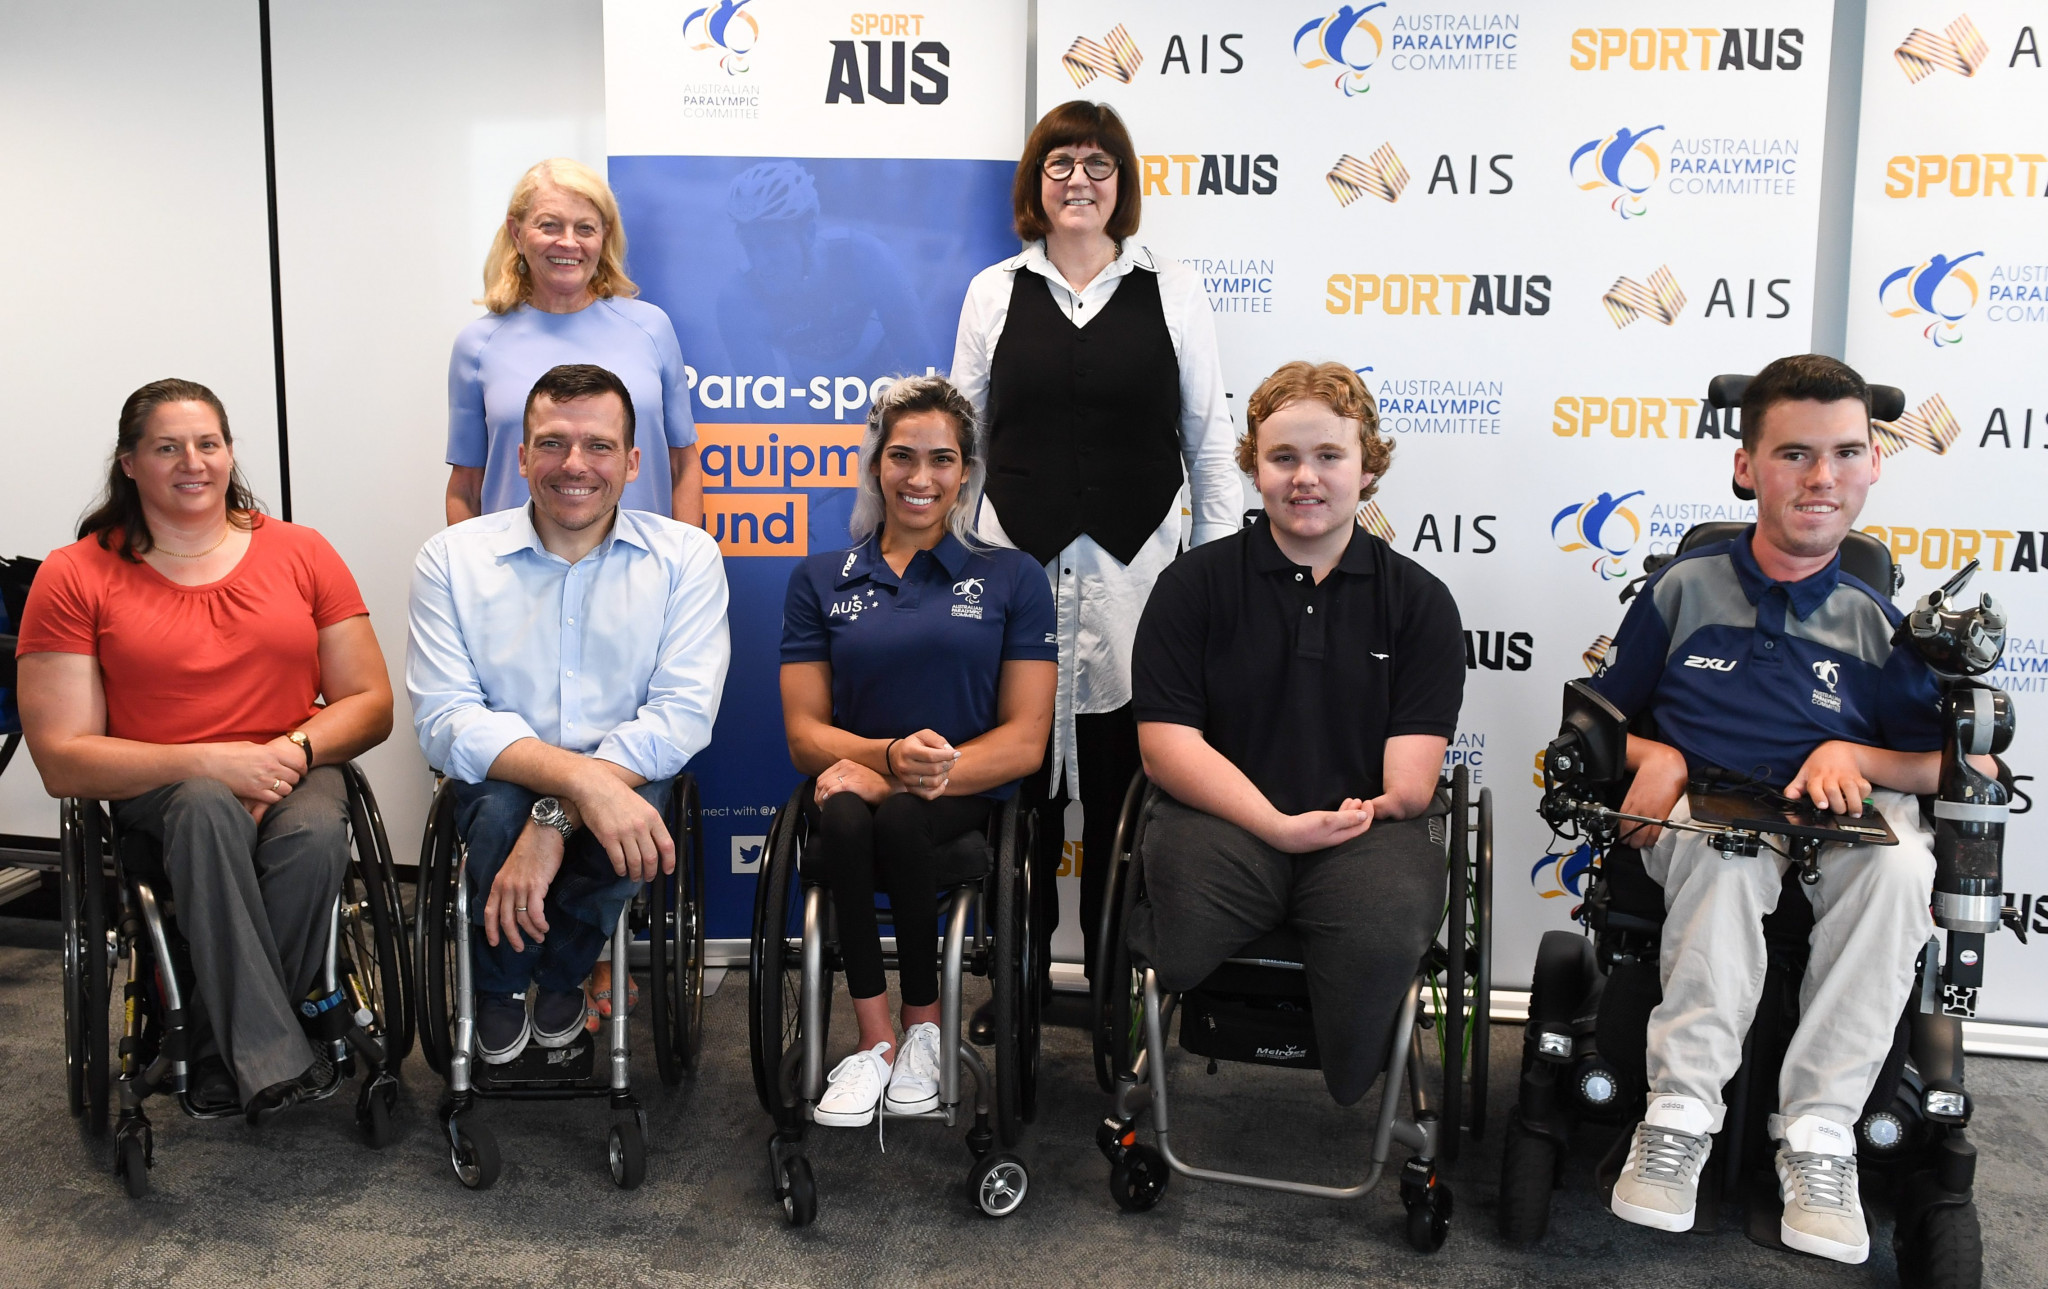 Australia's three-time Paralympic champion Kurt Fearnley, second left, attended the launch event to promote new Para-sport funding ©Getty Images